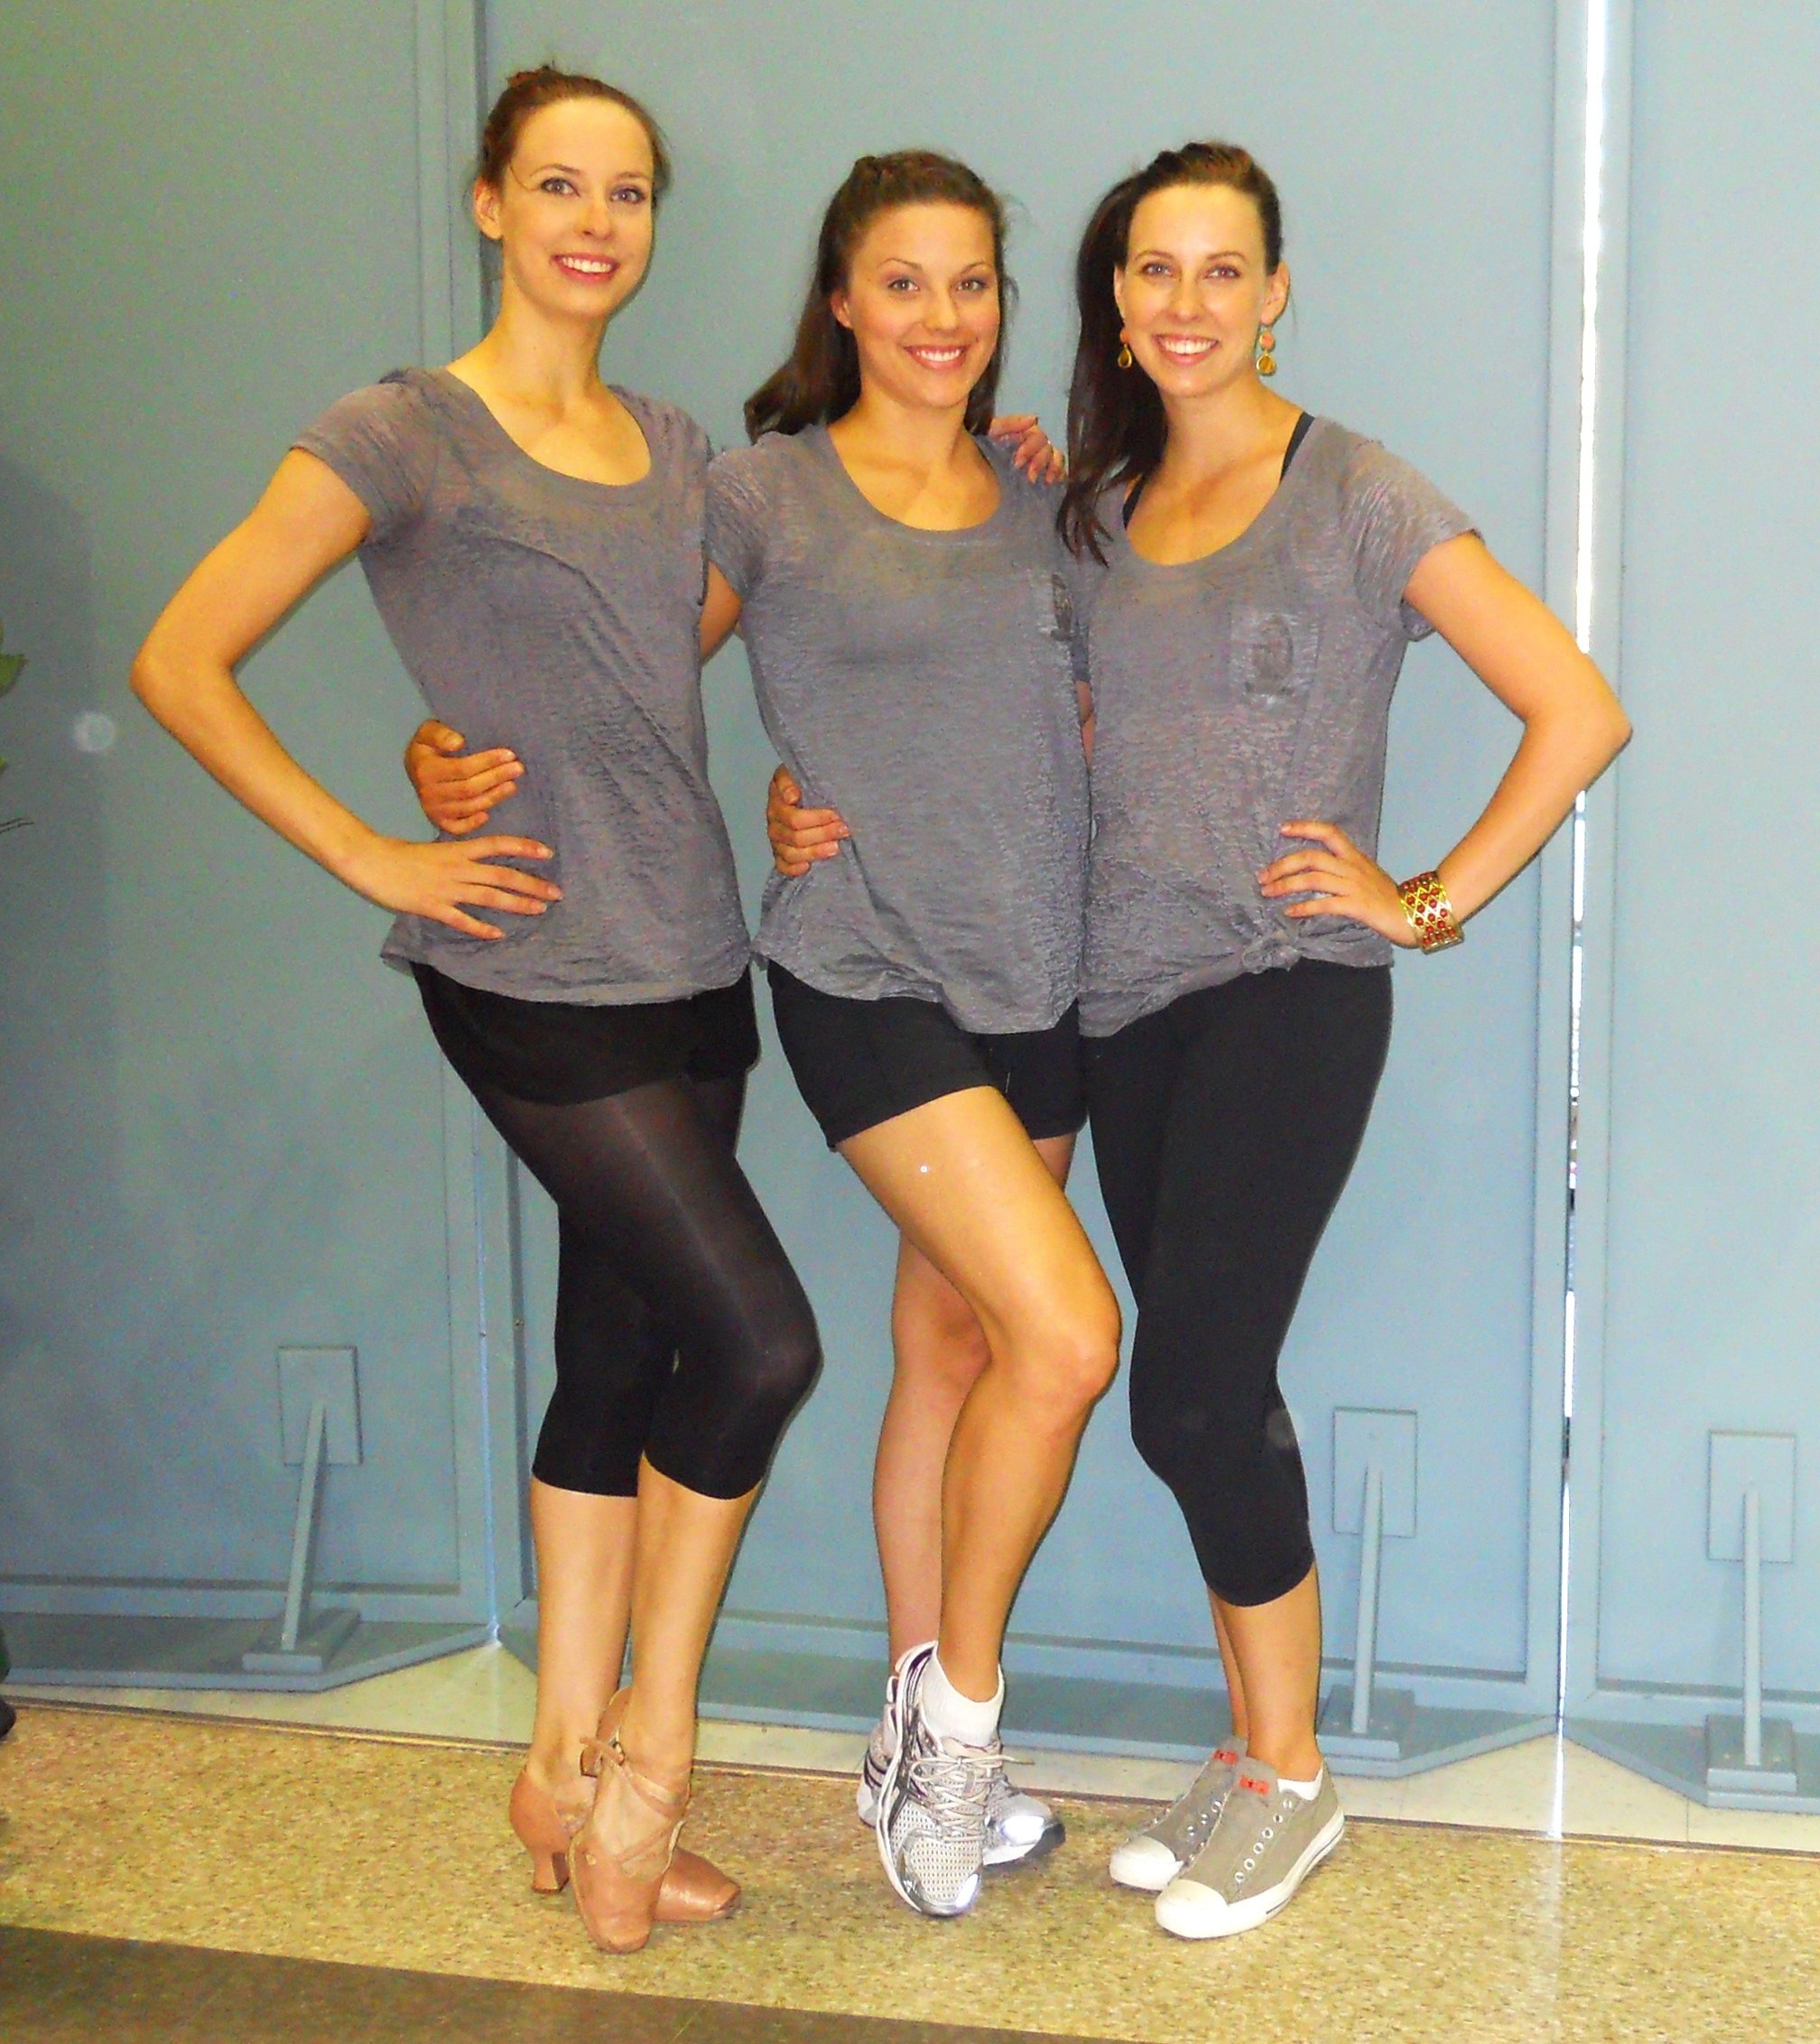 TALENTED TRIO – From left the Jantzie sisters